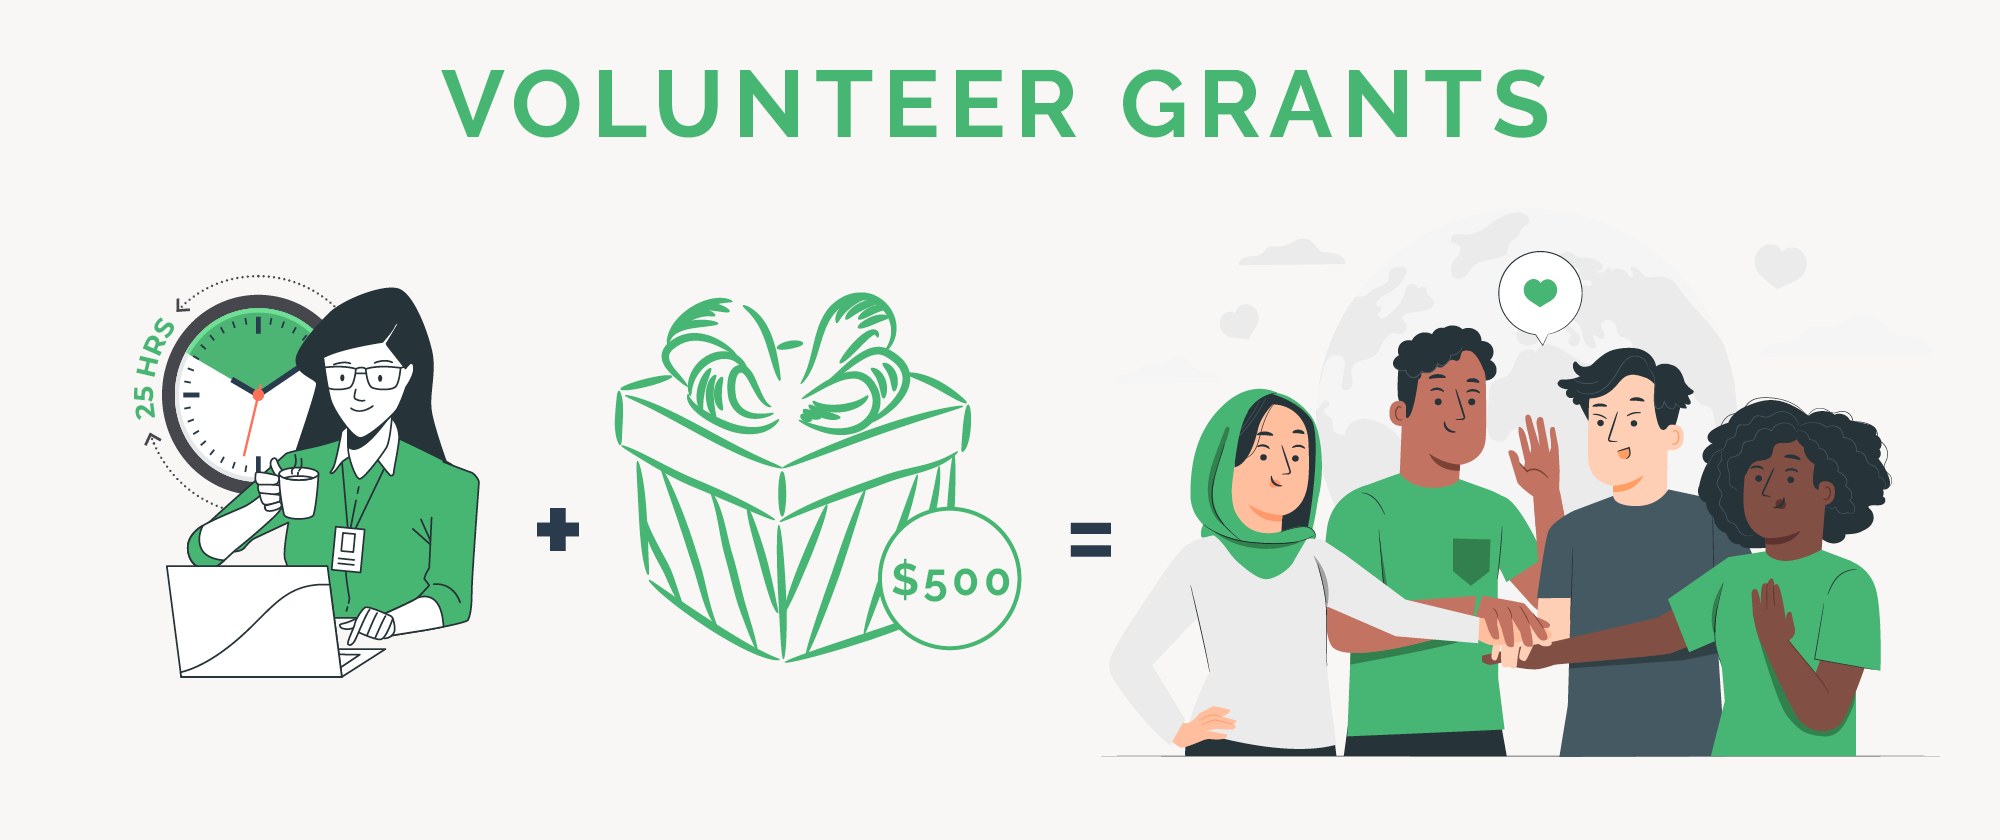 Through a volunteer grant program, you can encourage employees to donate their time to nonprofits.